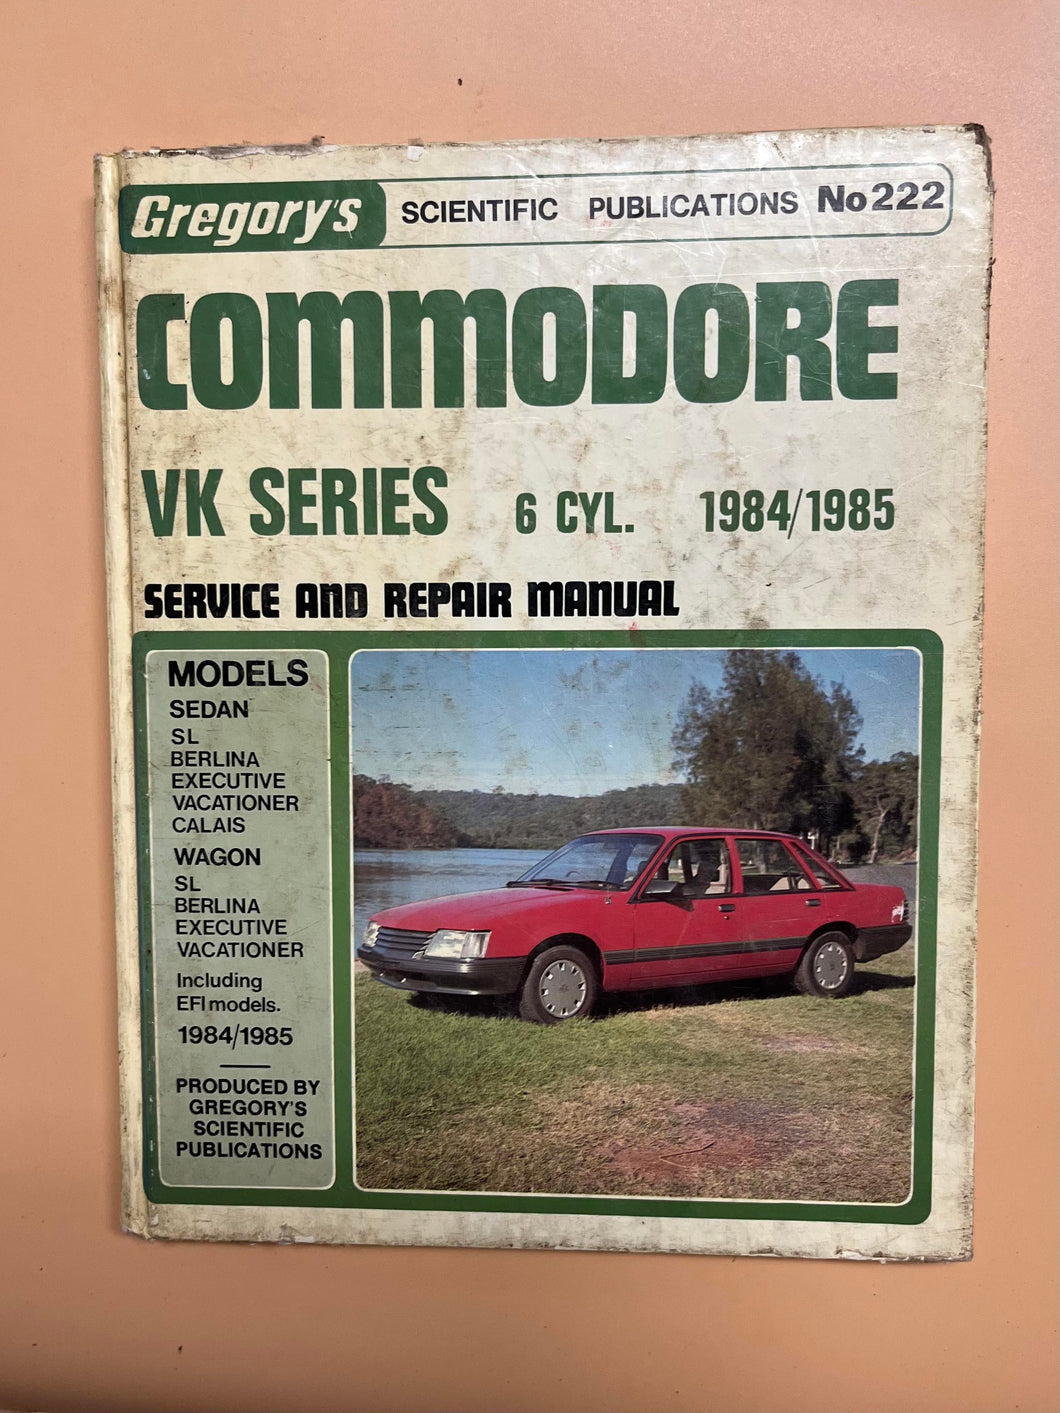 1984/1985 Commodore VK 6 Cylinder Service and Repair Manual